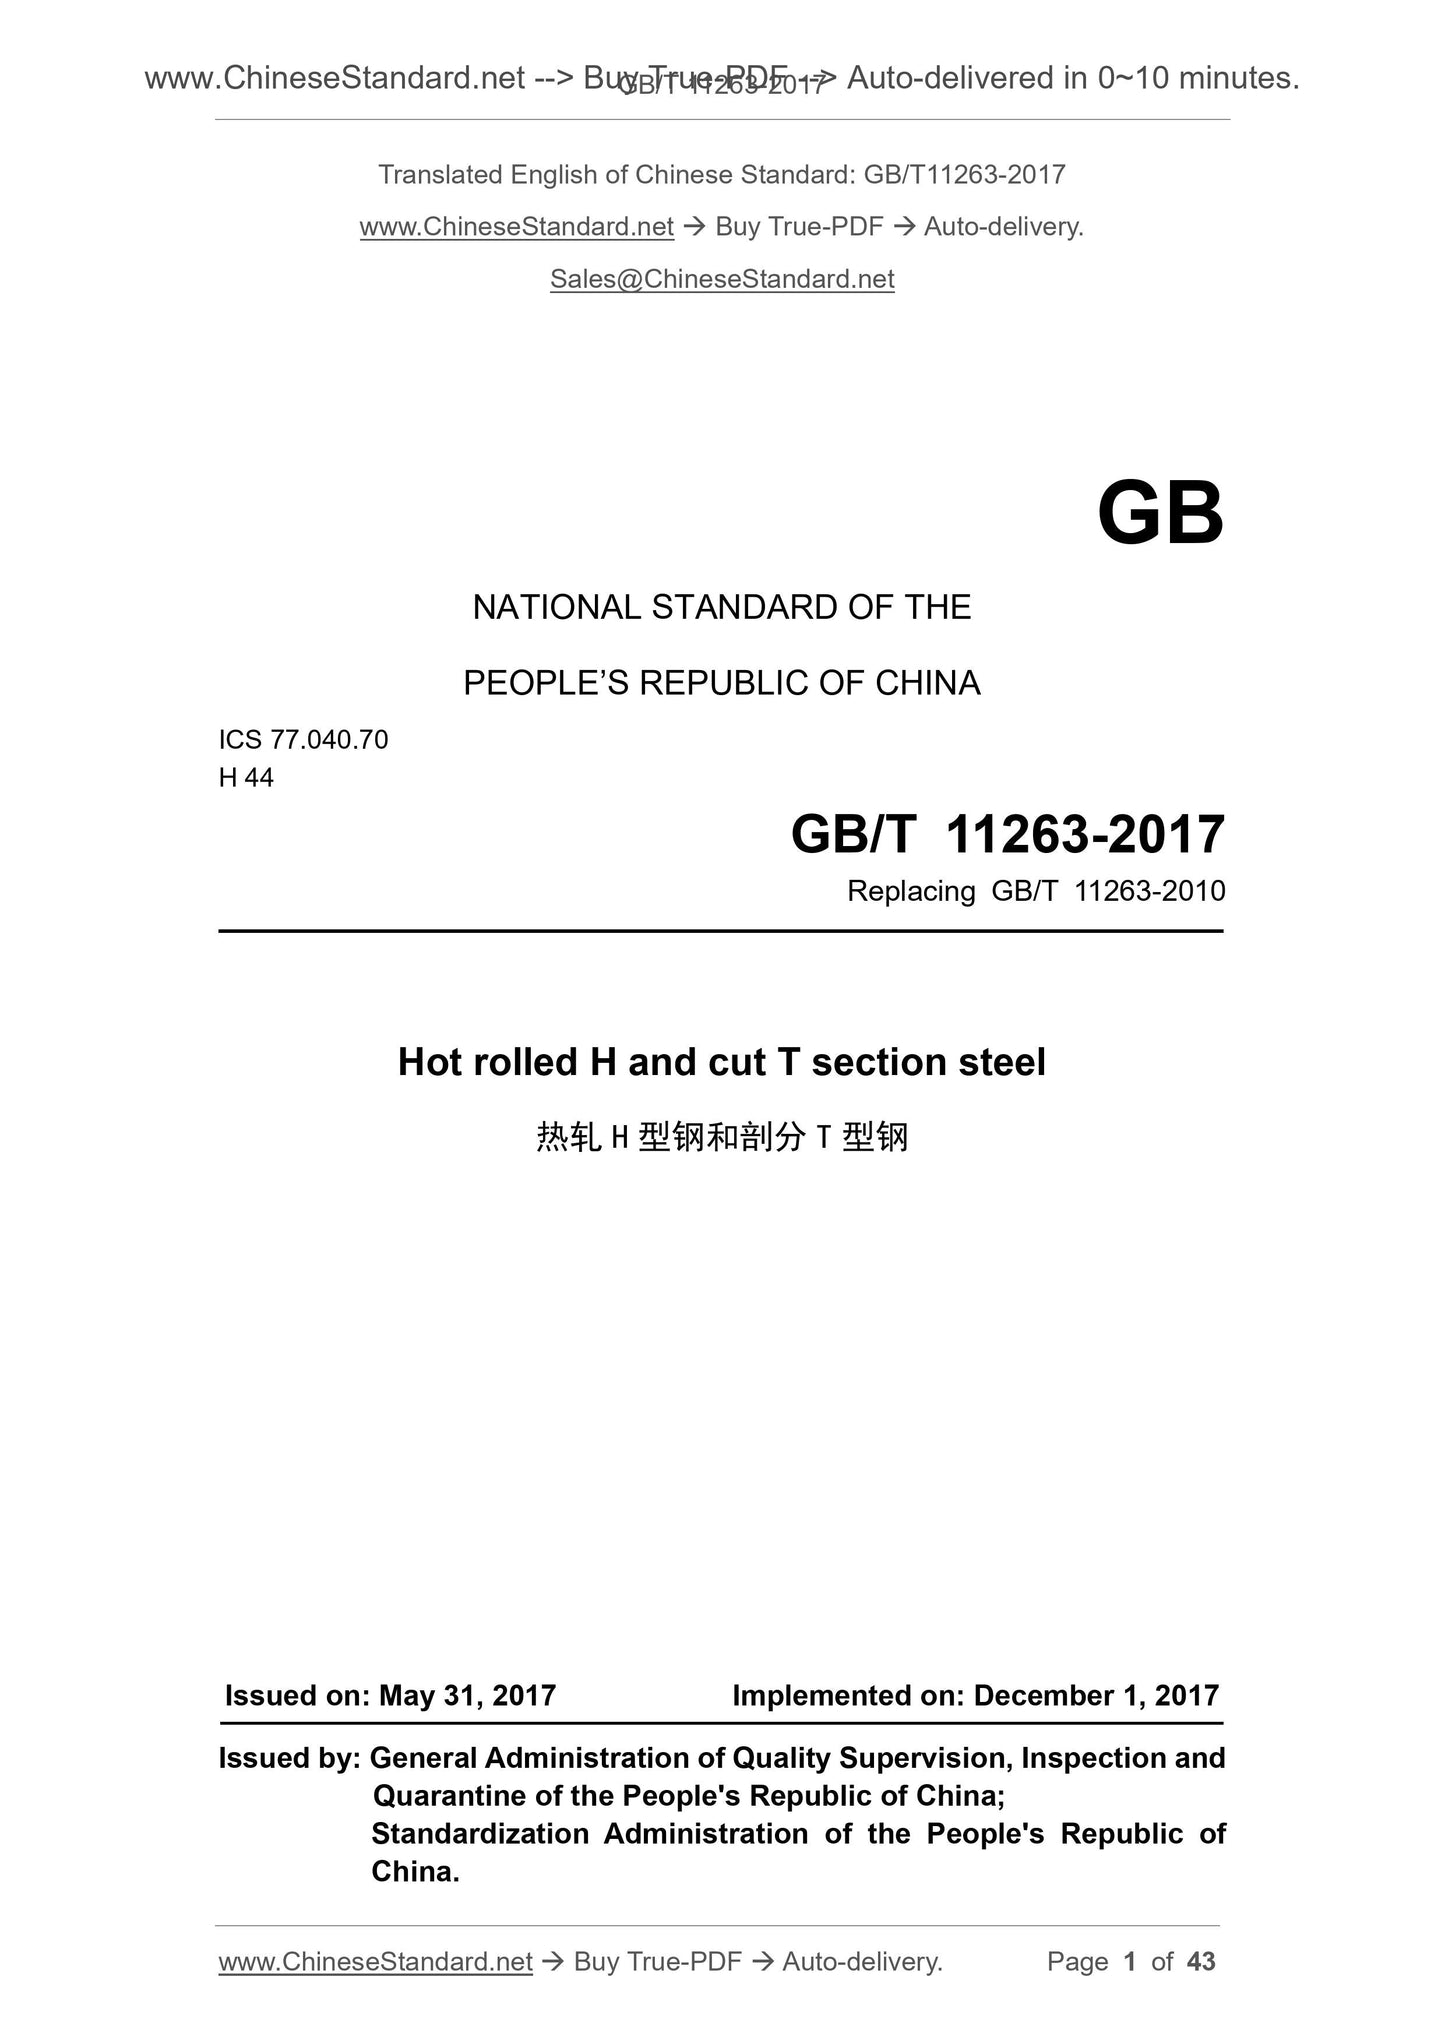 GB/T 11263-2017 Page 1